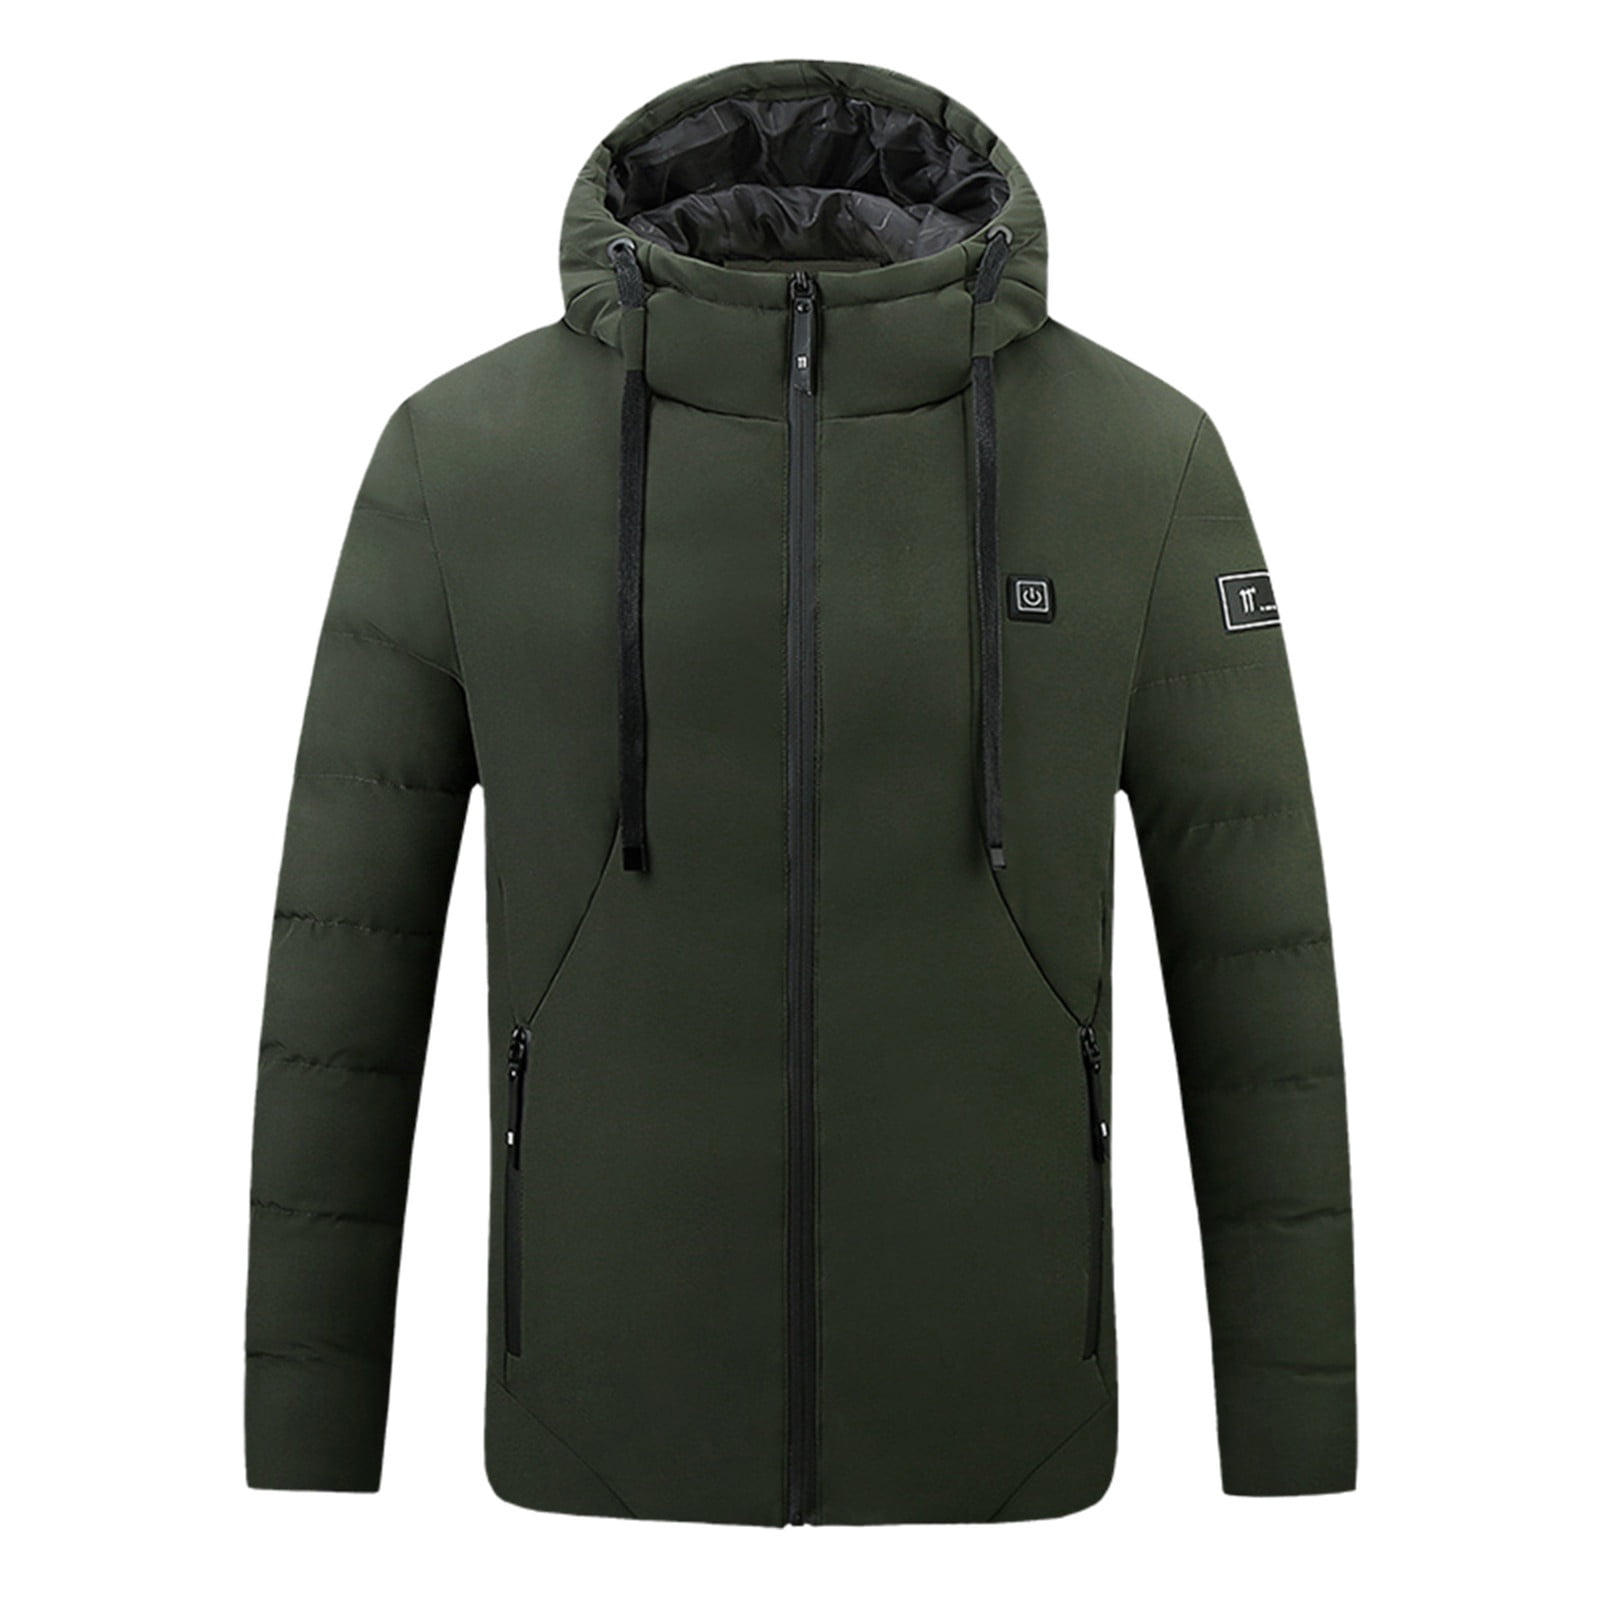 Symoid Men and Womens Heated Coat,Mens Winter Jacket,Cooling Women's  Outdoor Warm Clothes,Ski Clothing,Casual Fishing Apparel Army Green Size XL  